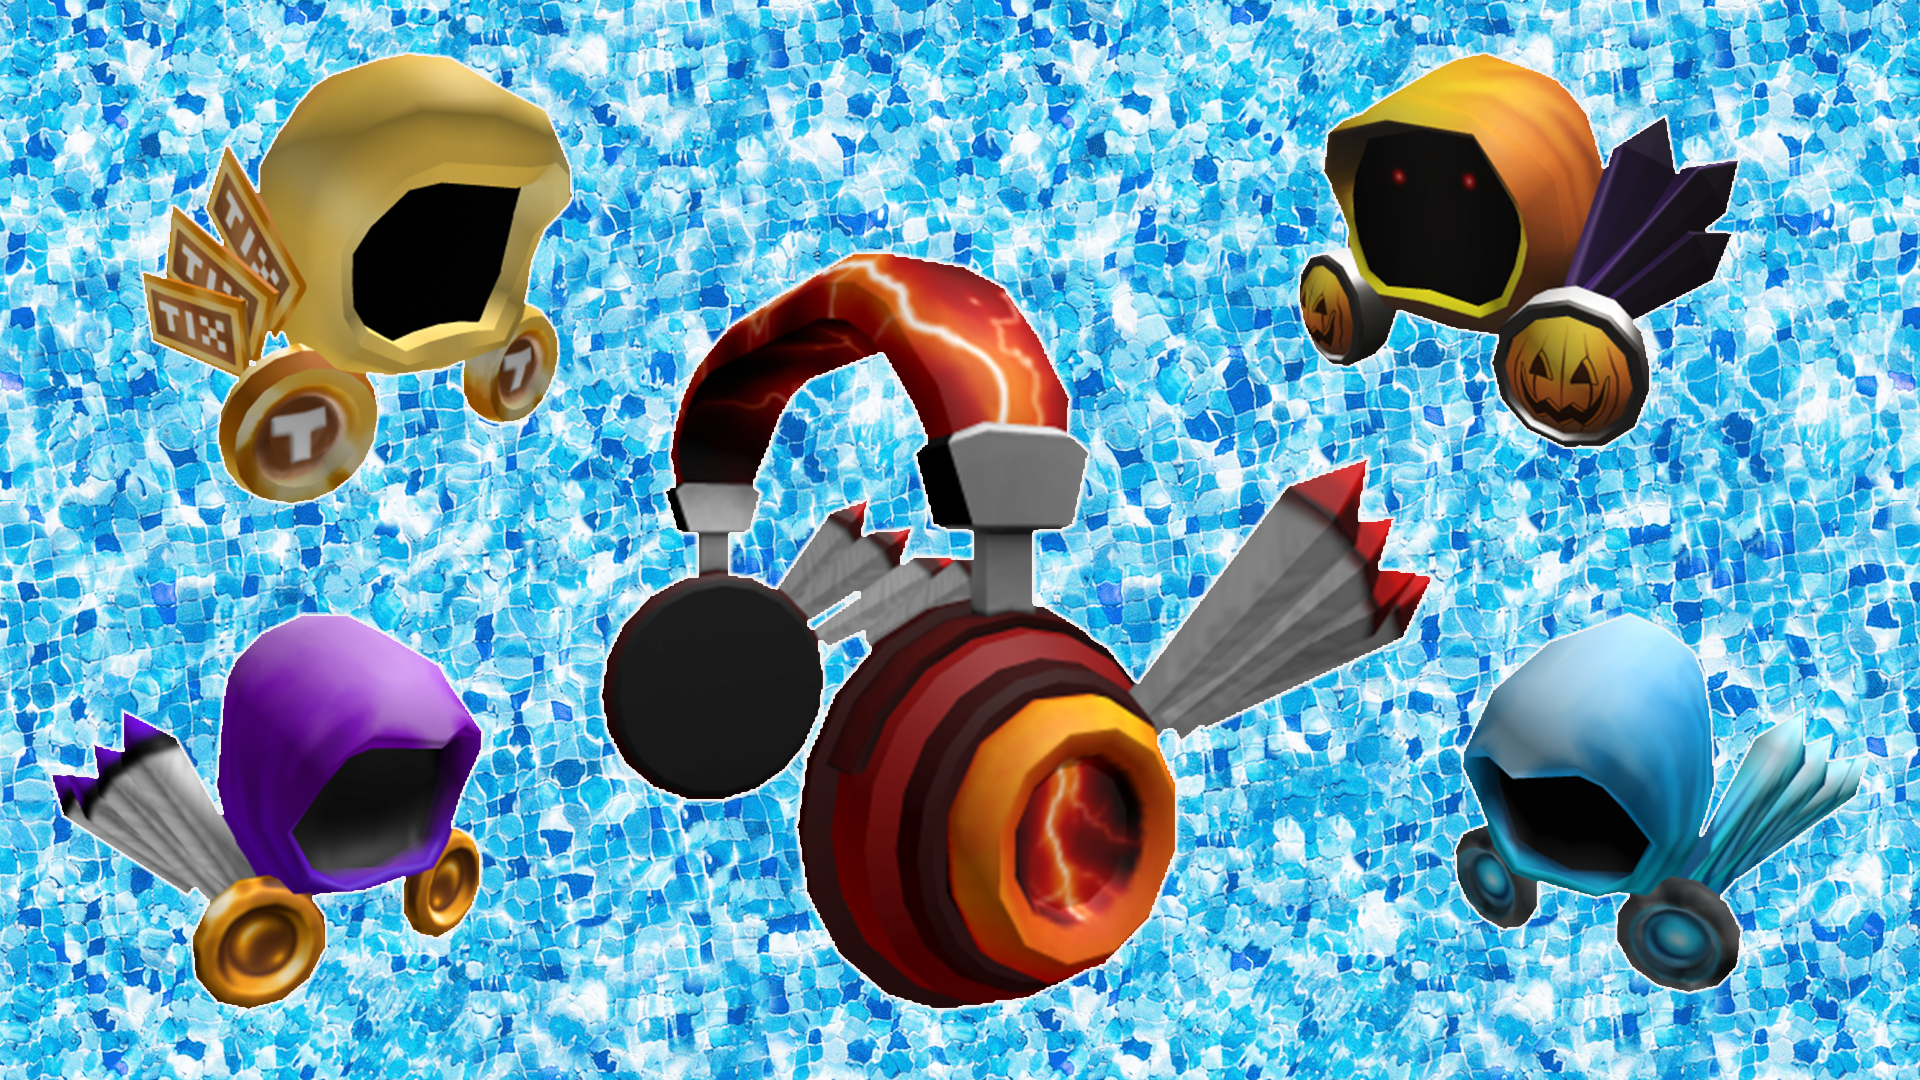 NEWS] NEW ROBLOX DOMINUS?! WILL BE FREE?! 